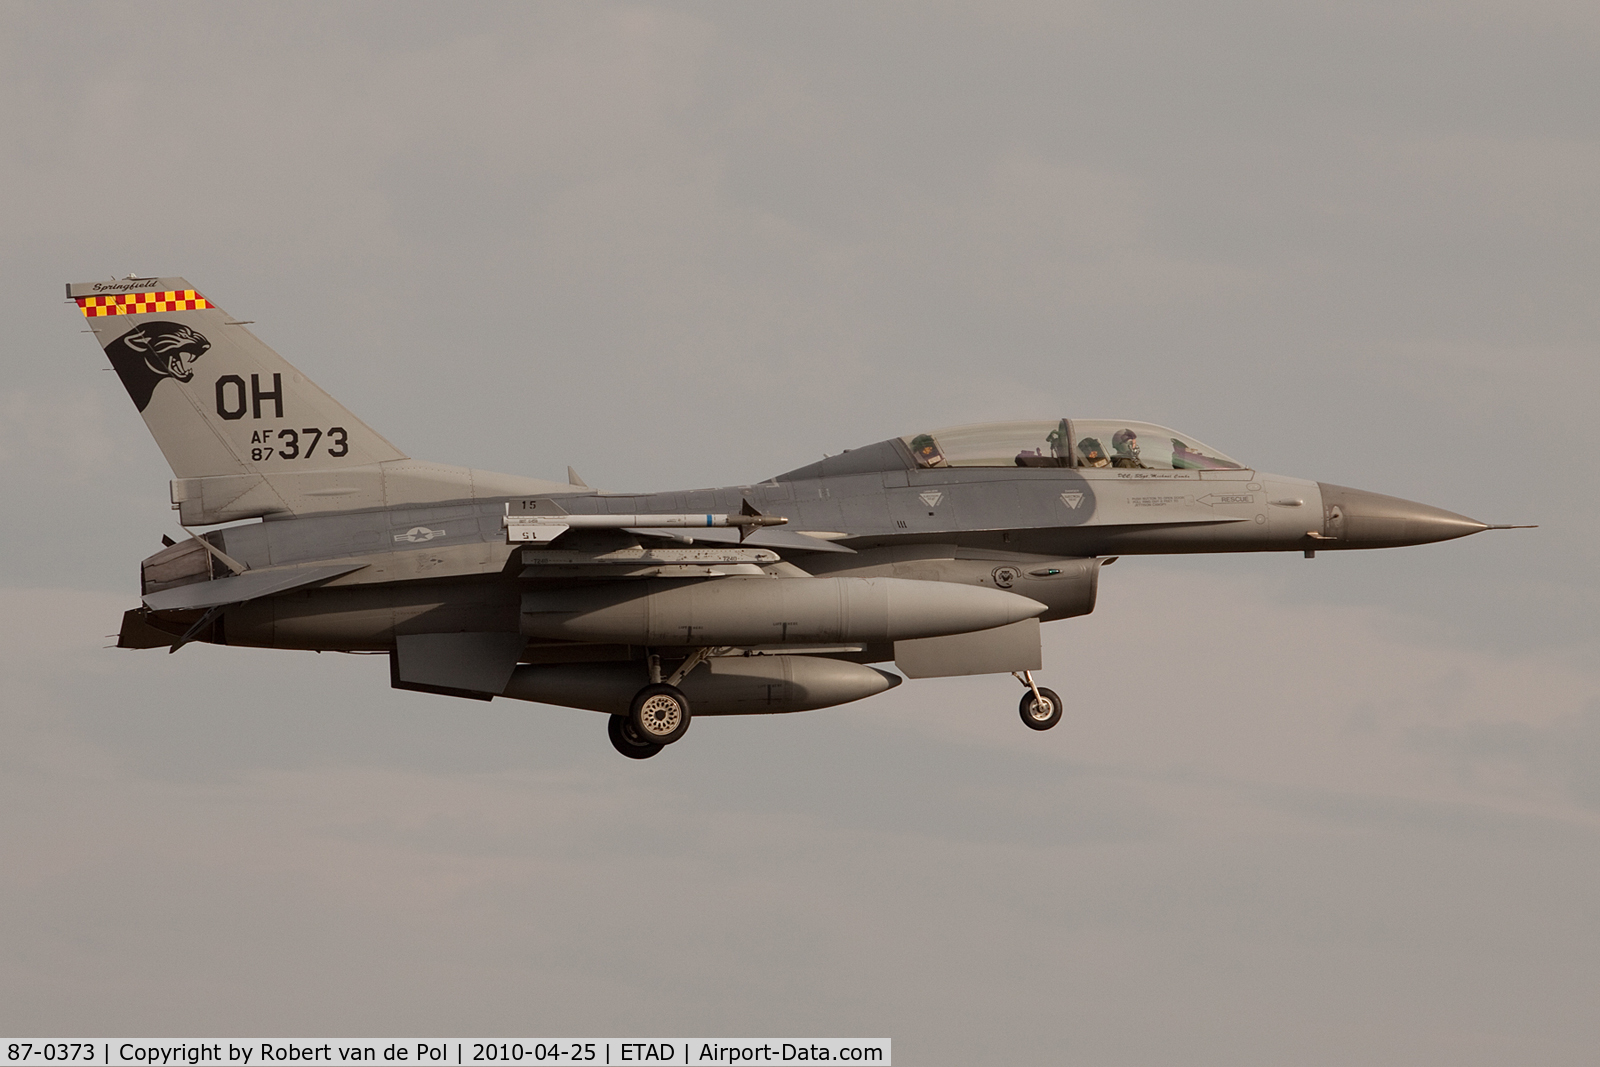 87-0373, 1987 General Dynamics F-16D Fighting Falcon C/N 5D-67, 2010-04-25 ETAD 87-0373/OH F-16D 162nd FS/ 178th FW OH ANG